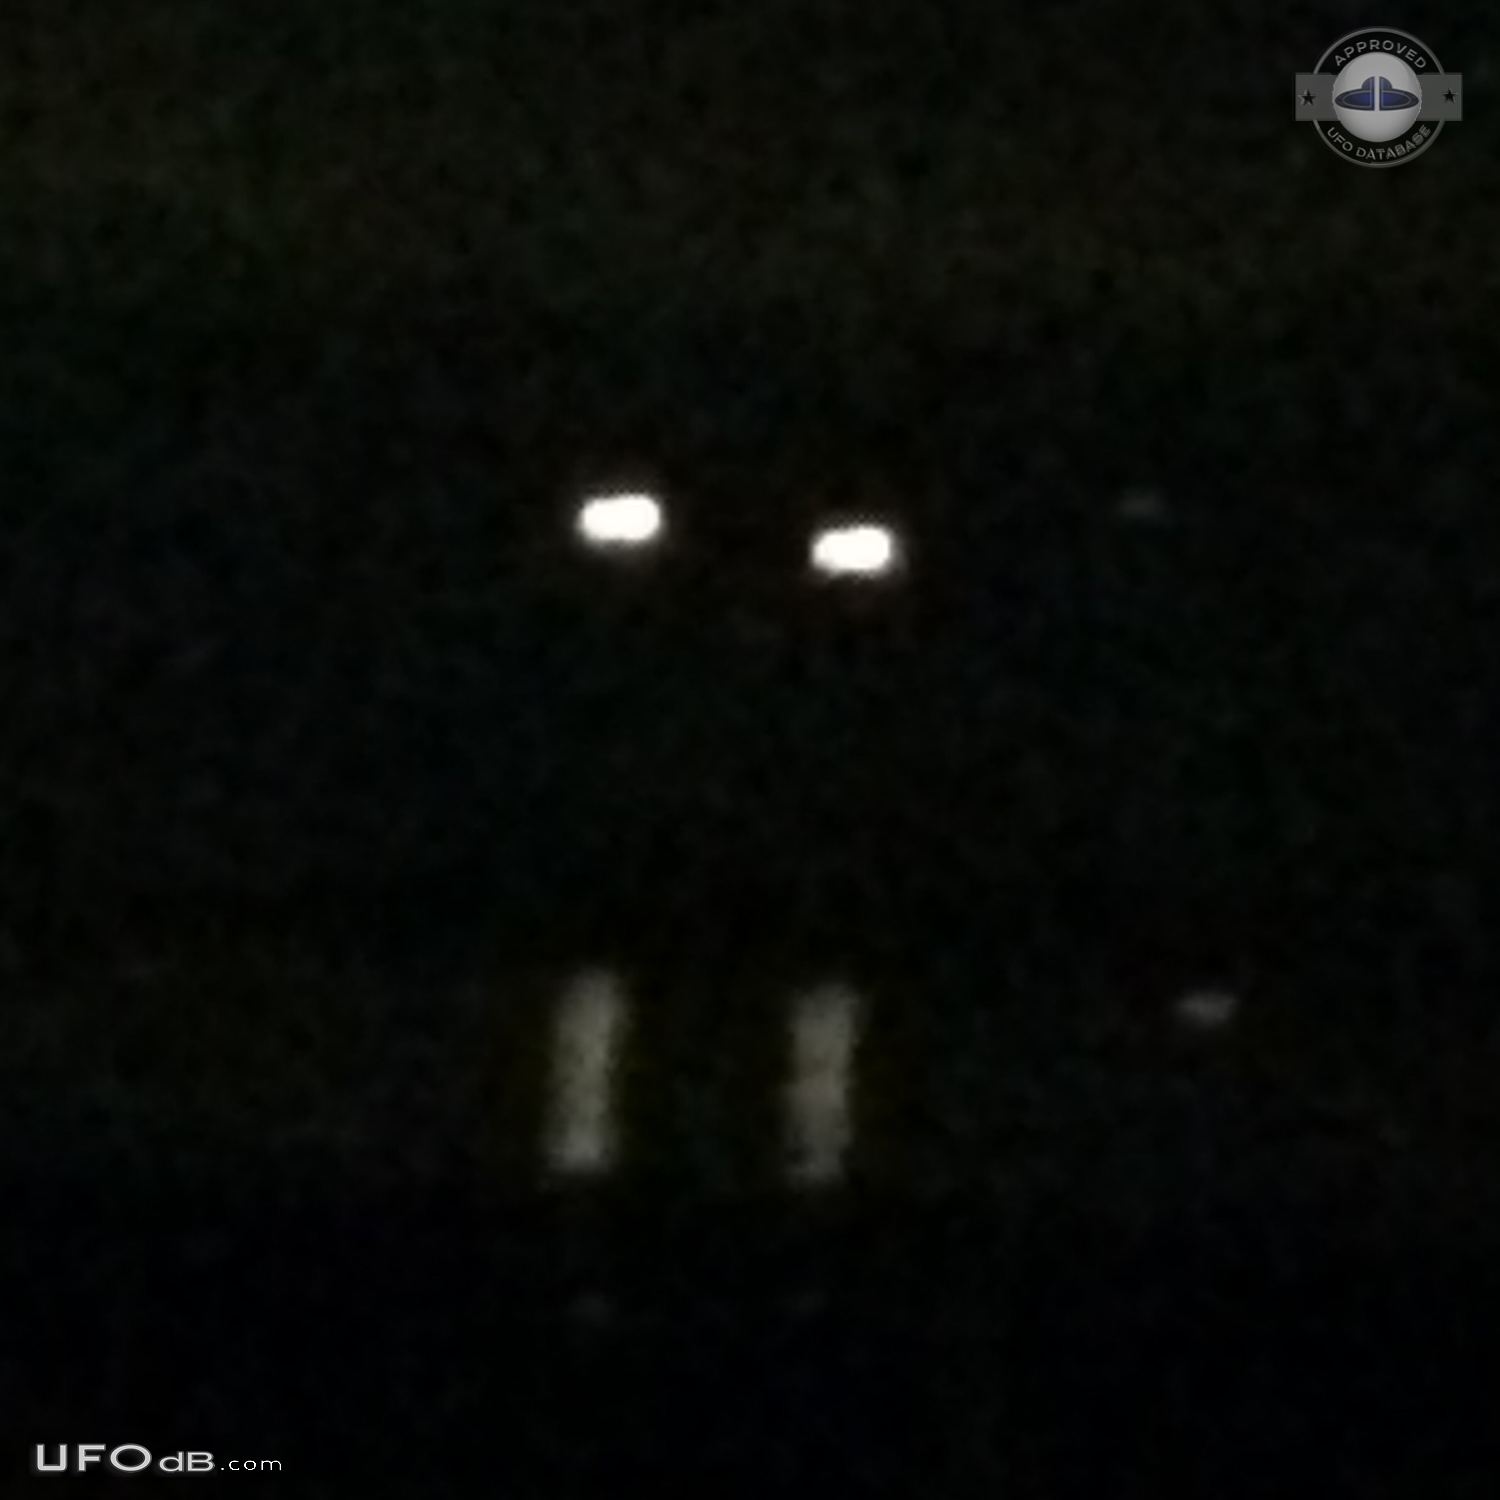 Yellowish-white UFOs with hints of red at center hovered - Clinton Was UFO Picture #755-1